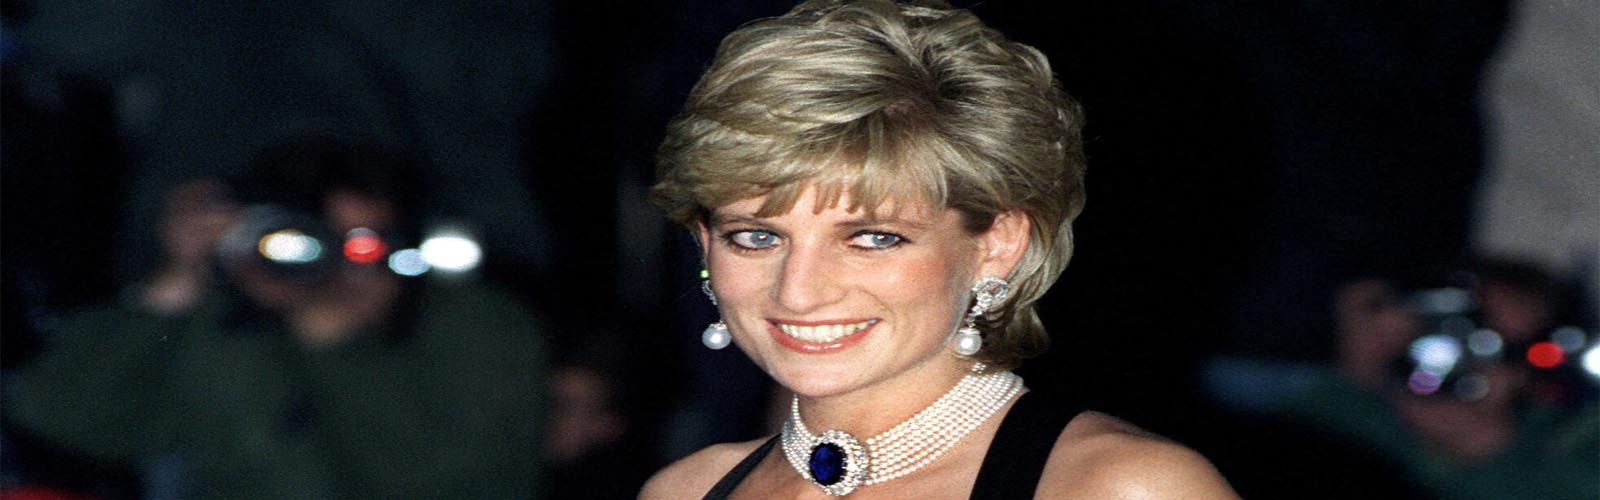 Princess Diana beguiles the world 20 years after death